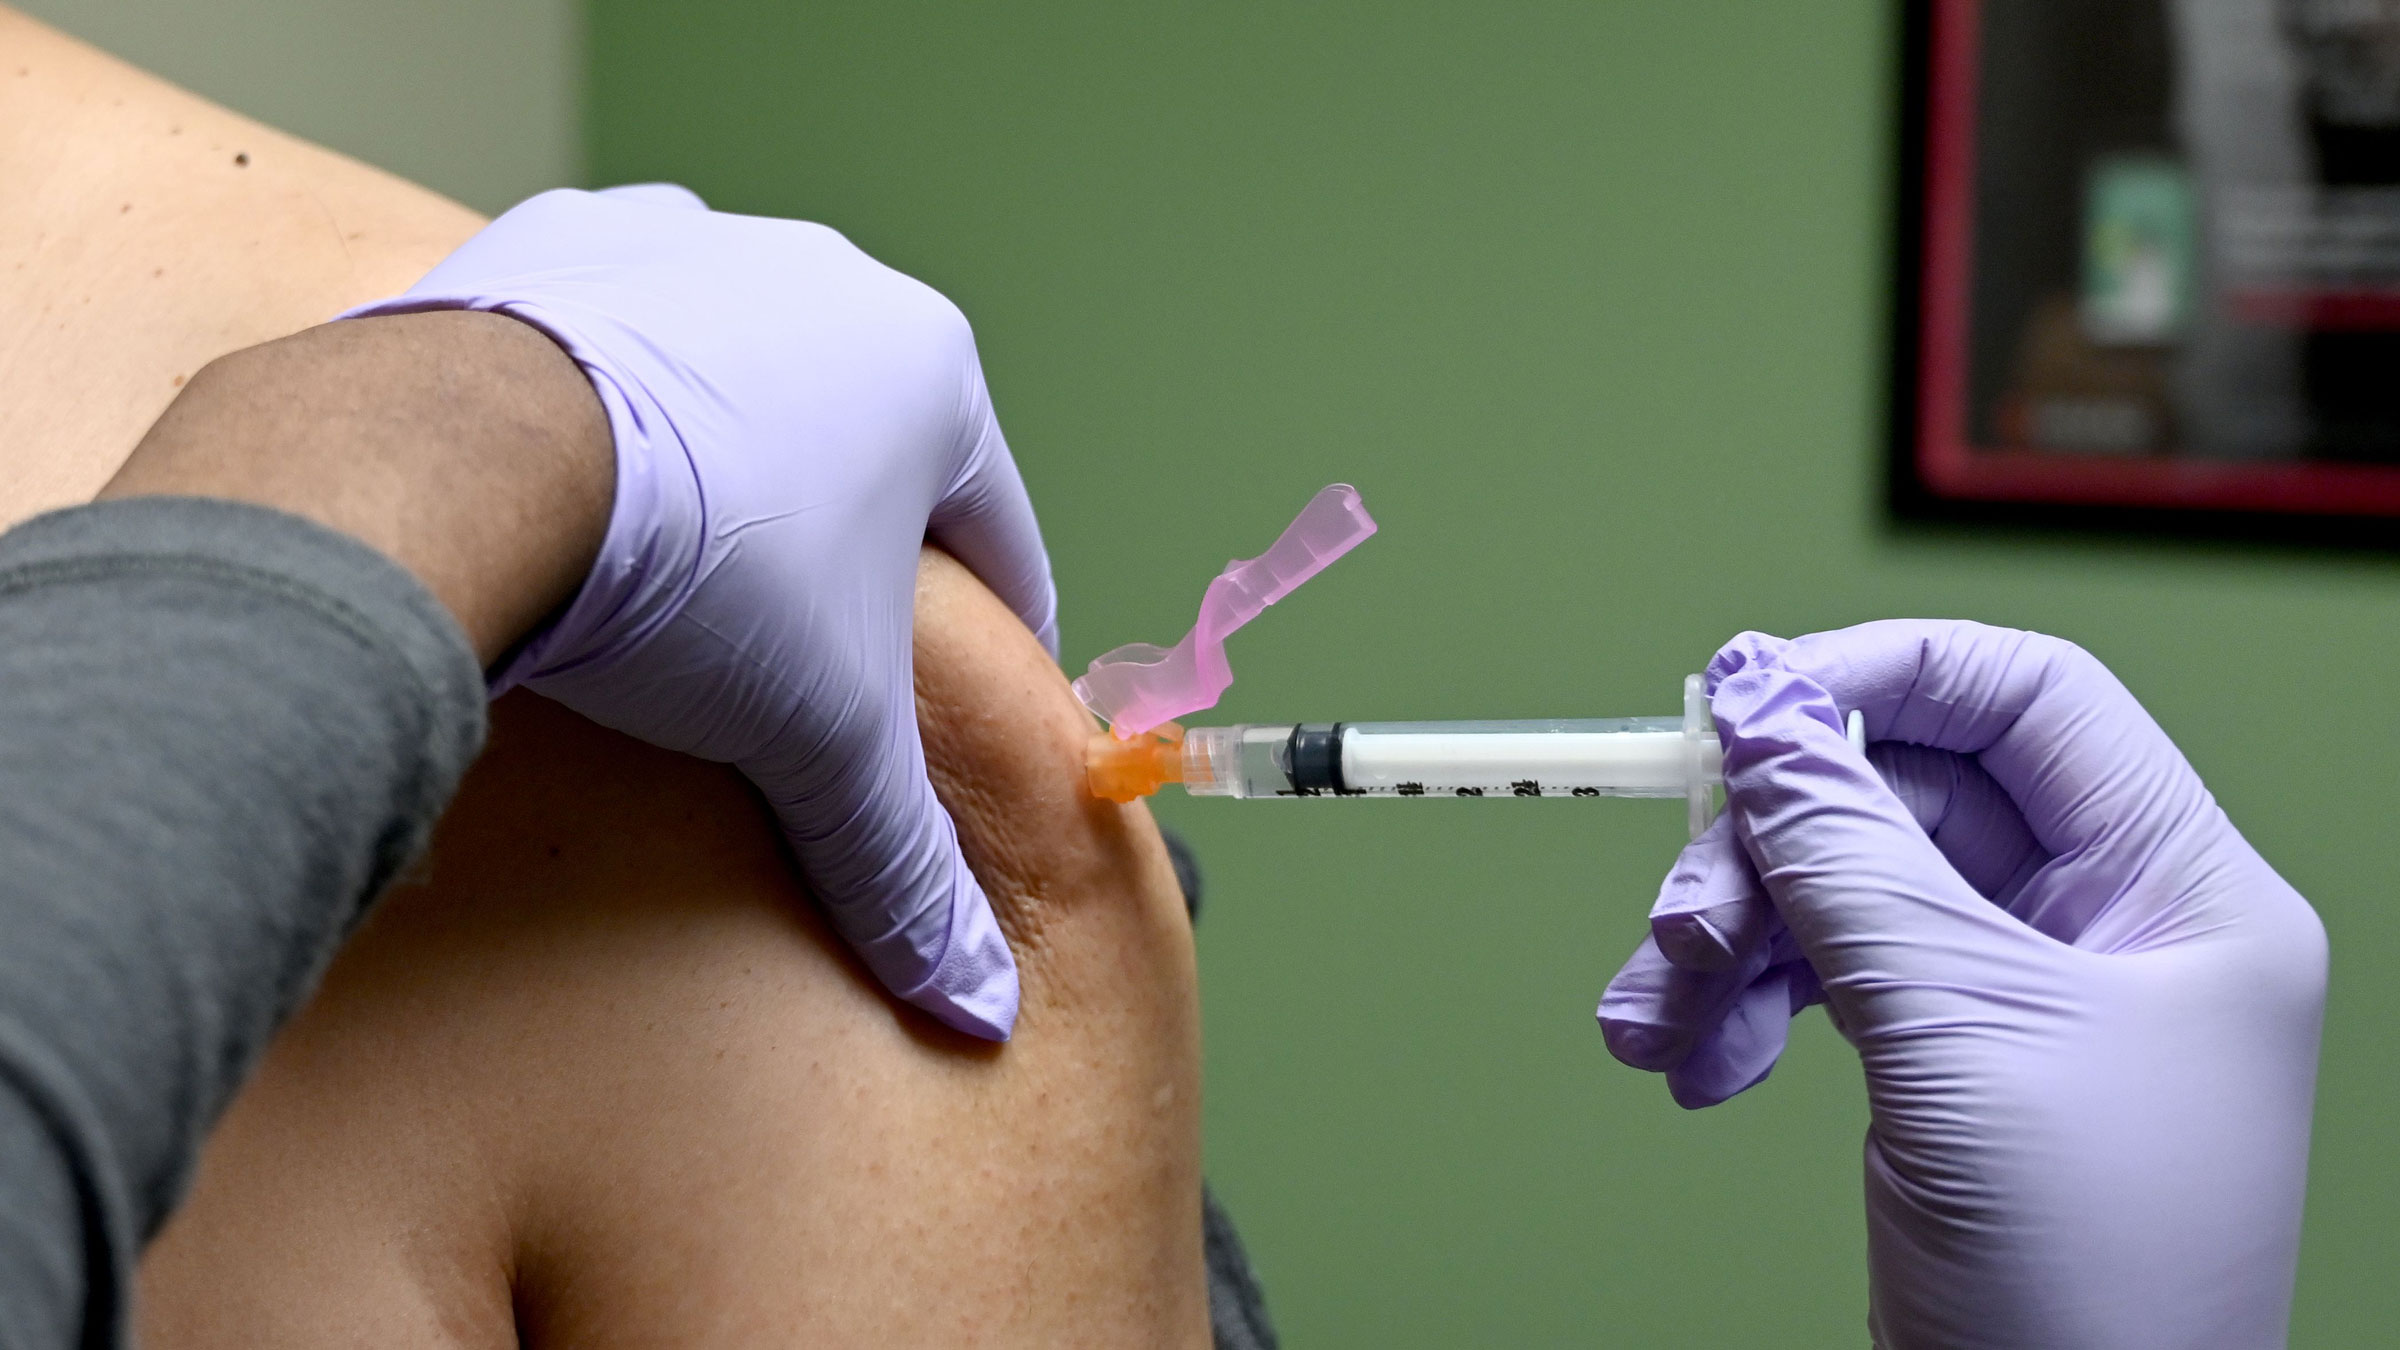 A man gets a flu shot at a health facility in Washington, DC, in January.